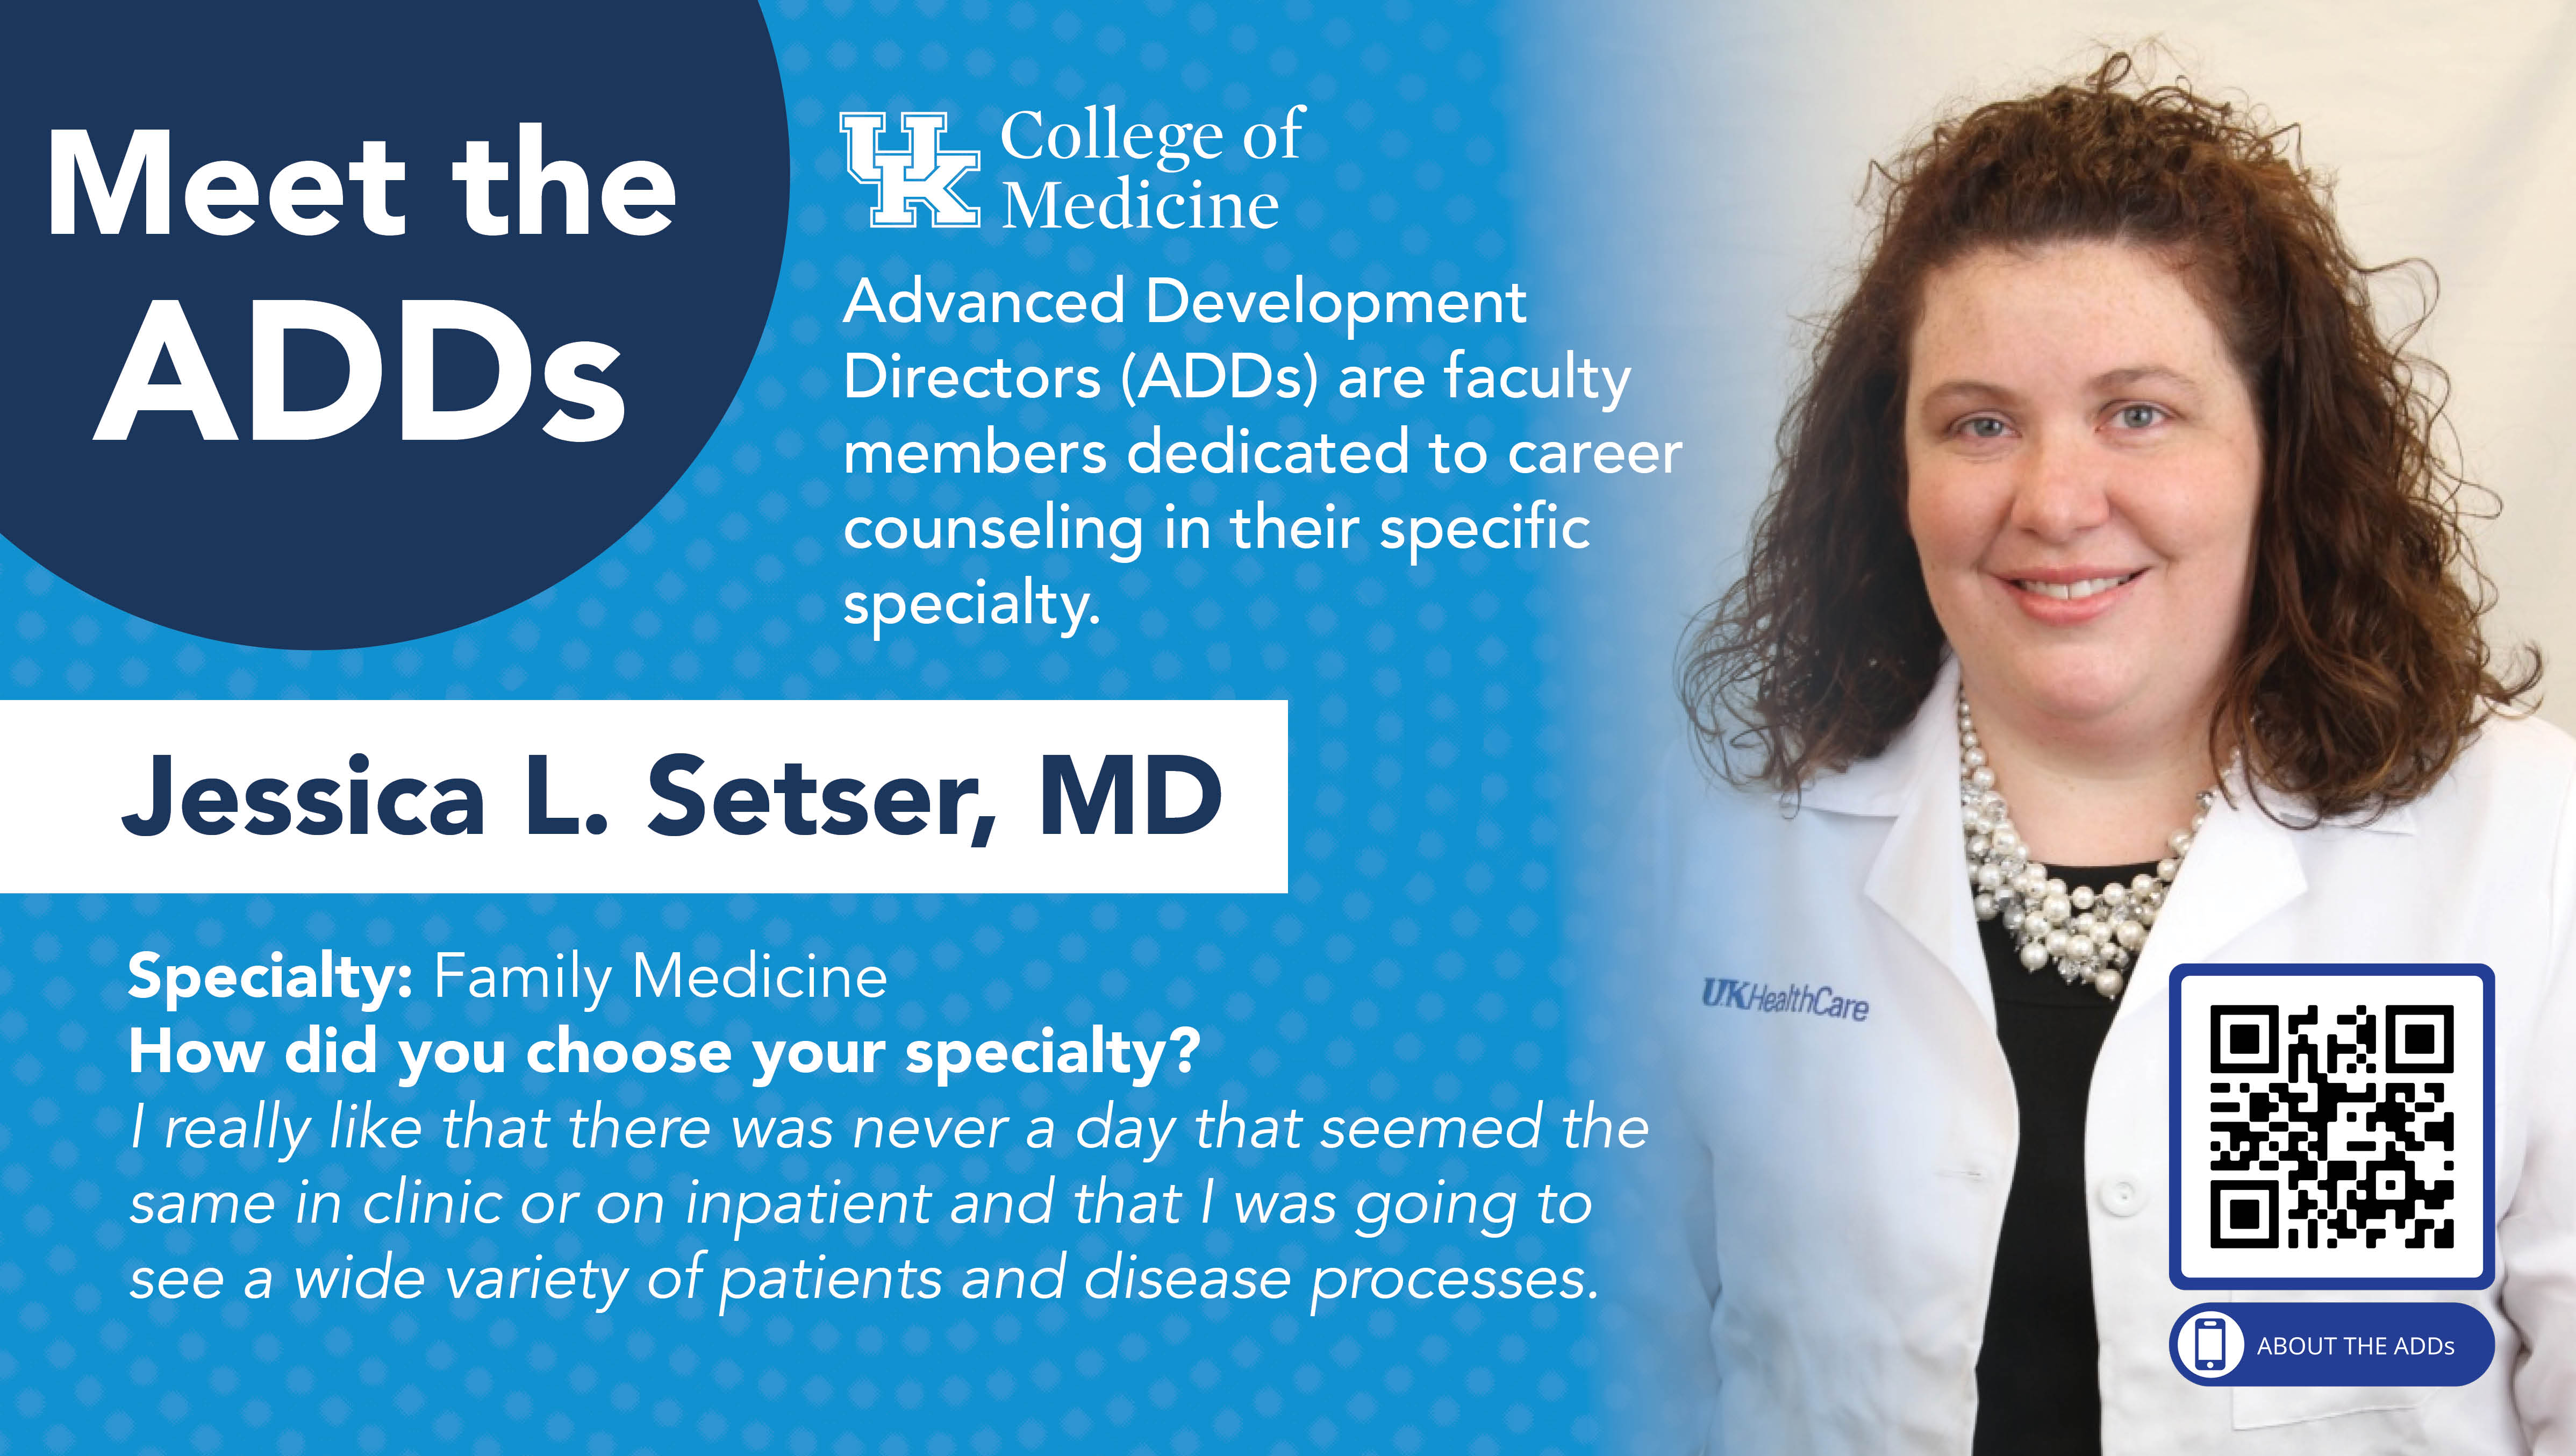 meet the ADDs spotlight on dr. jessica setser, who specializes in family and community medicine.